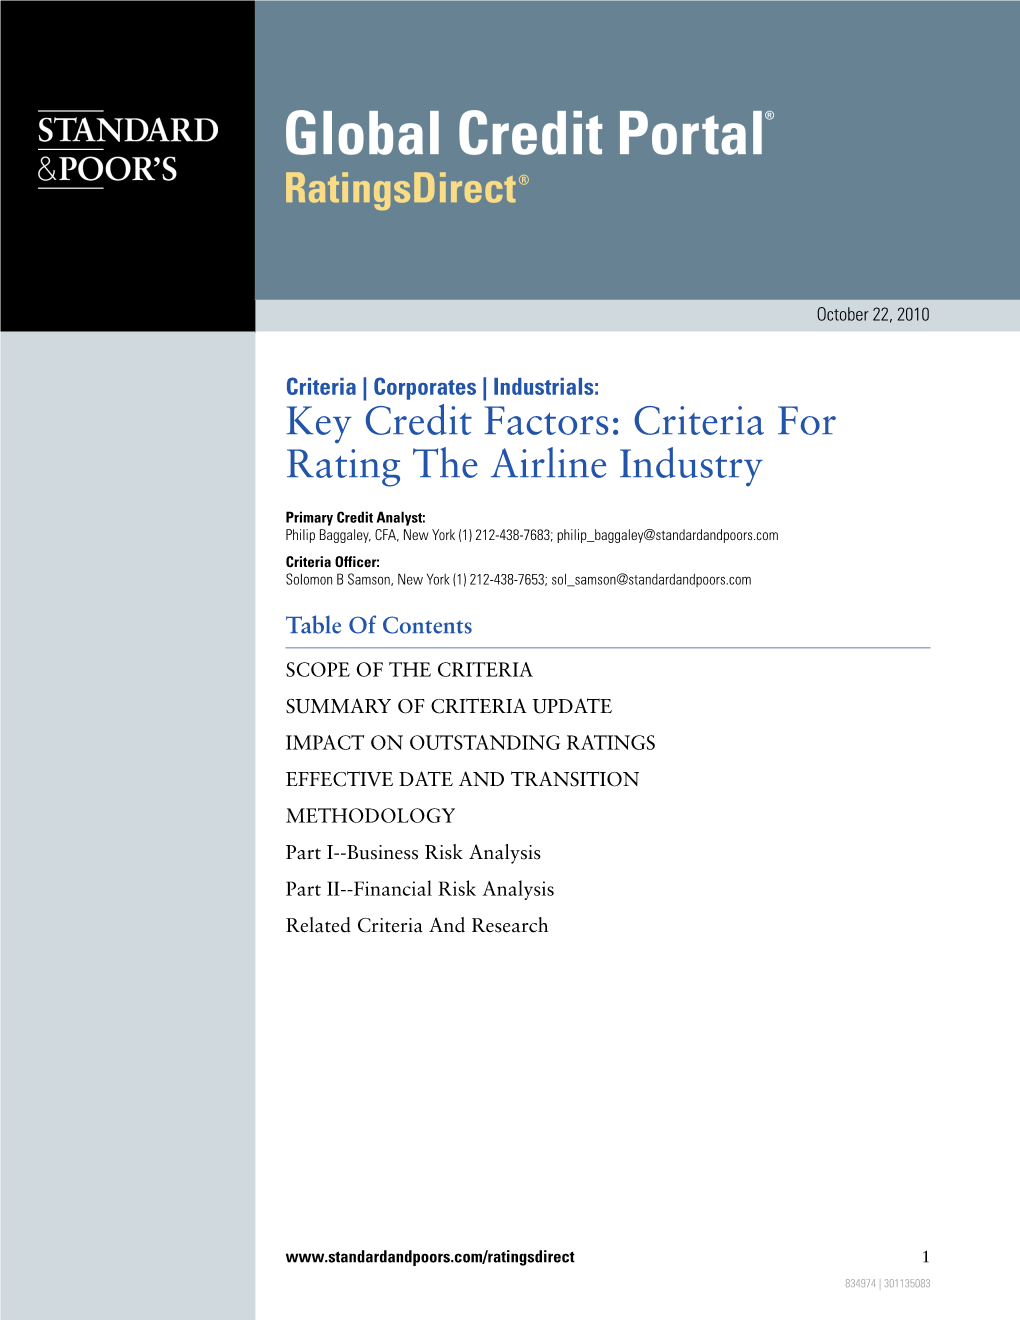 Key Credit Factors: Criteria for Rating the Airline Industry